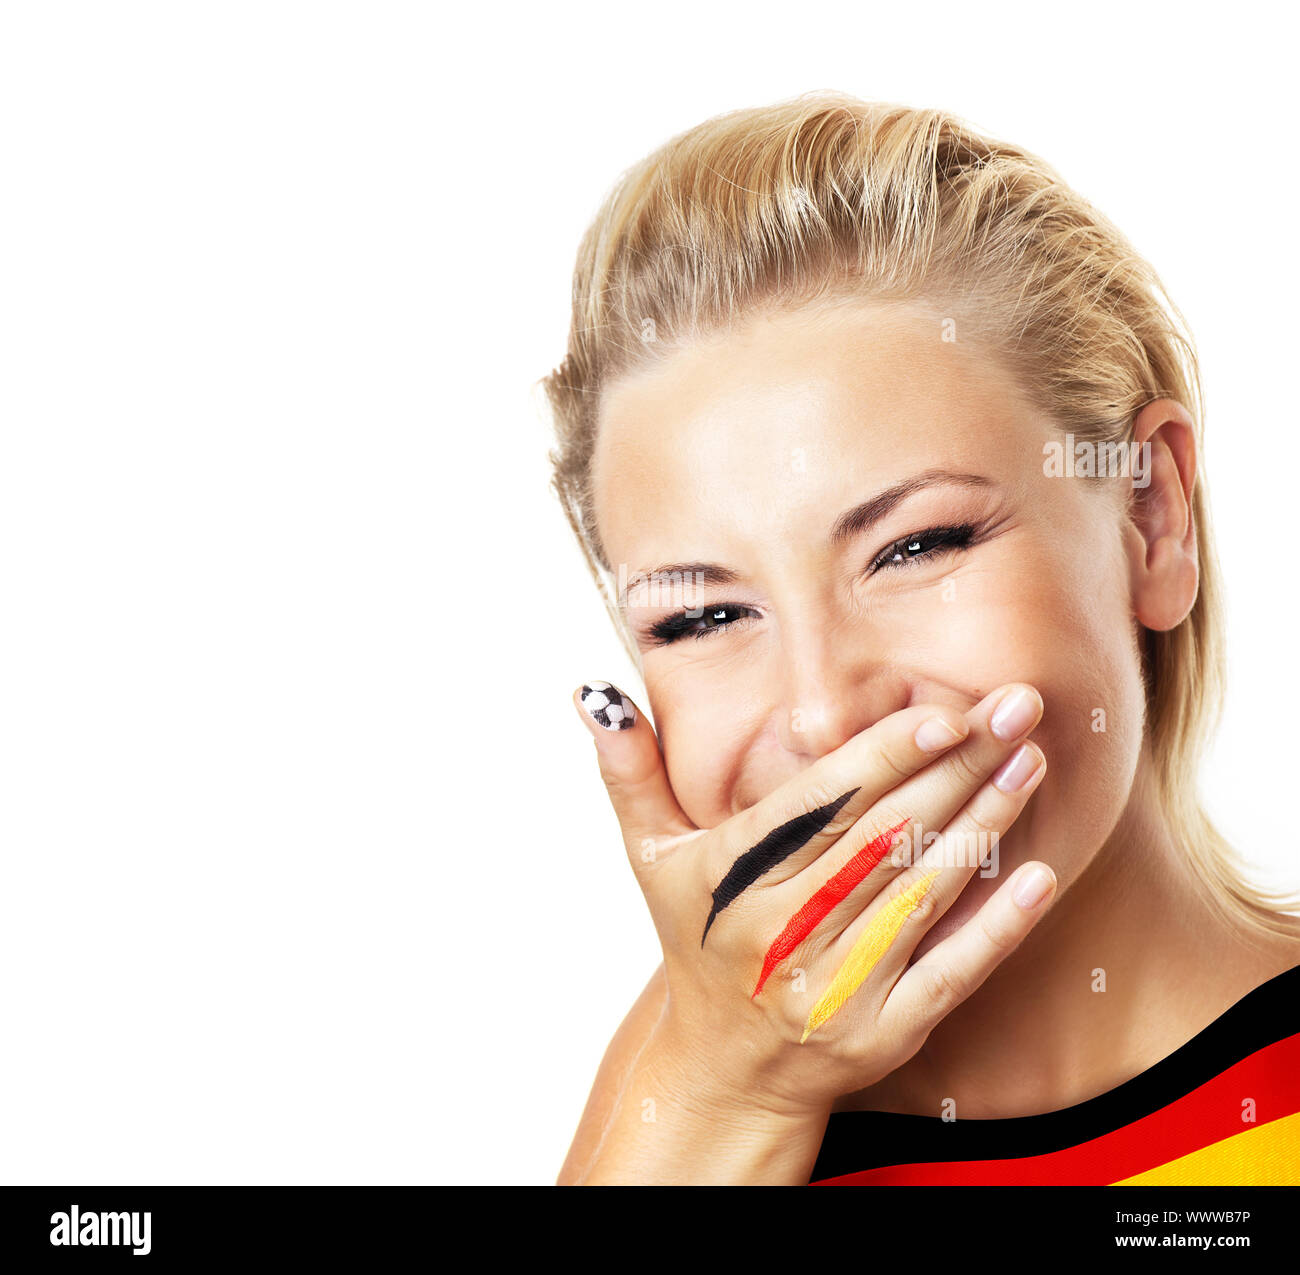 Smiling football fan, closeup on face, female covering mouth with painted in flag colors hand, woman expressing emotions of joy, German team supporter Stock Photo